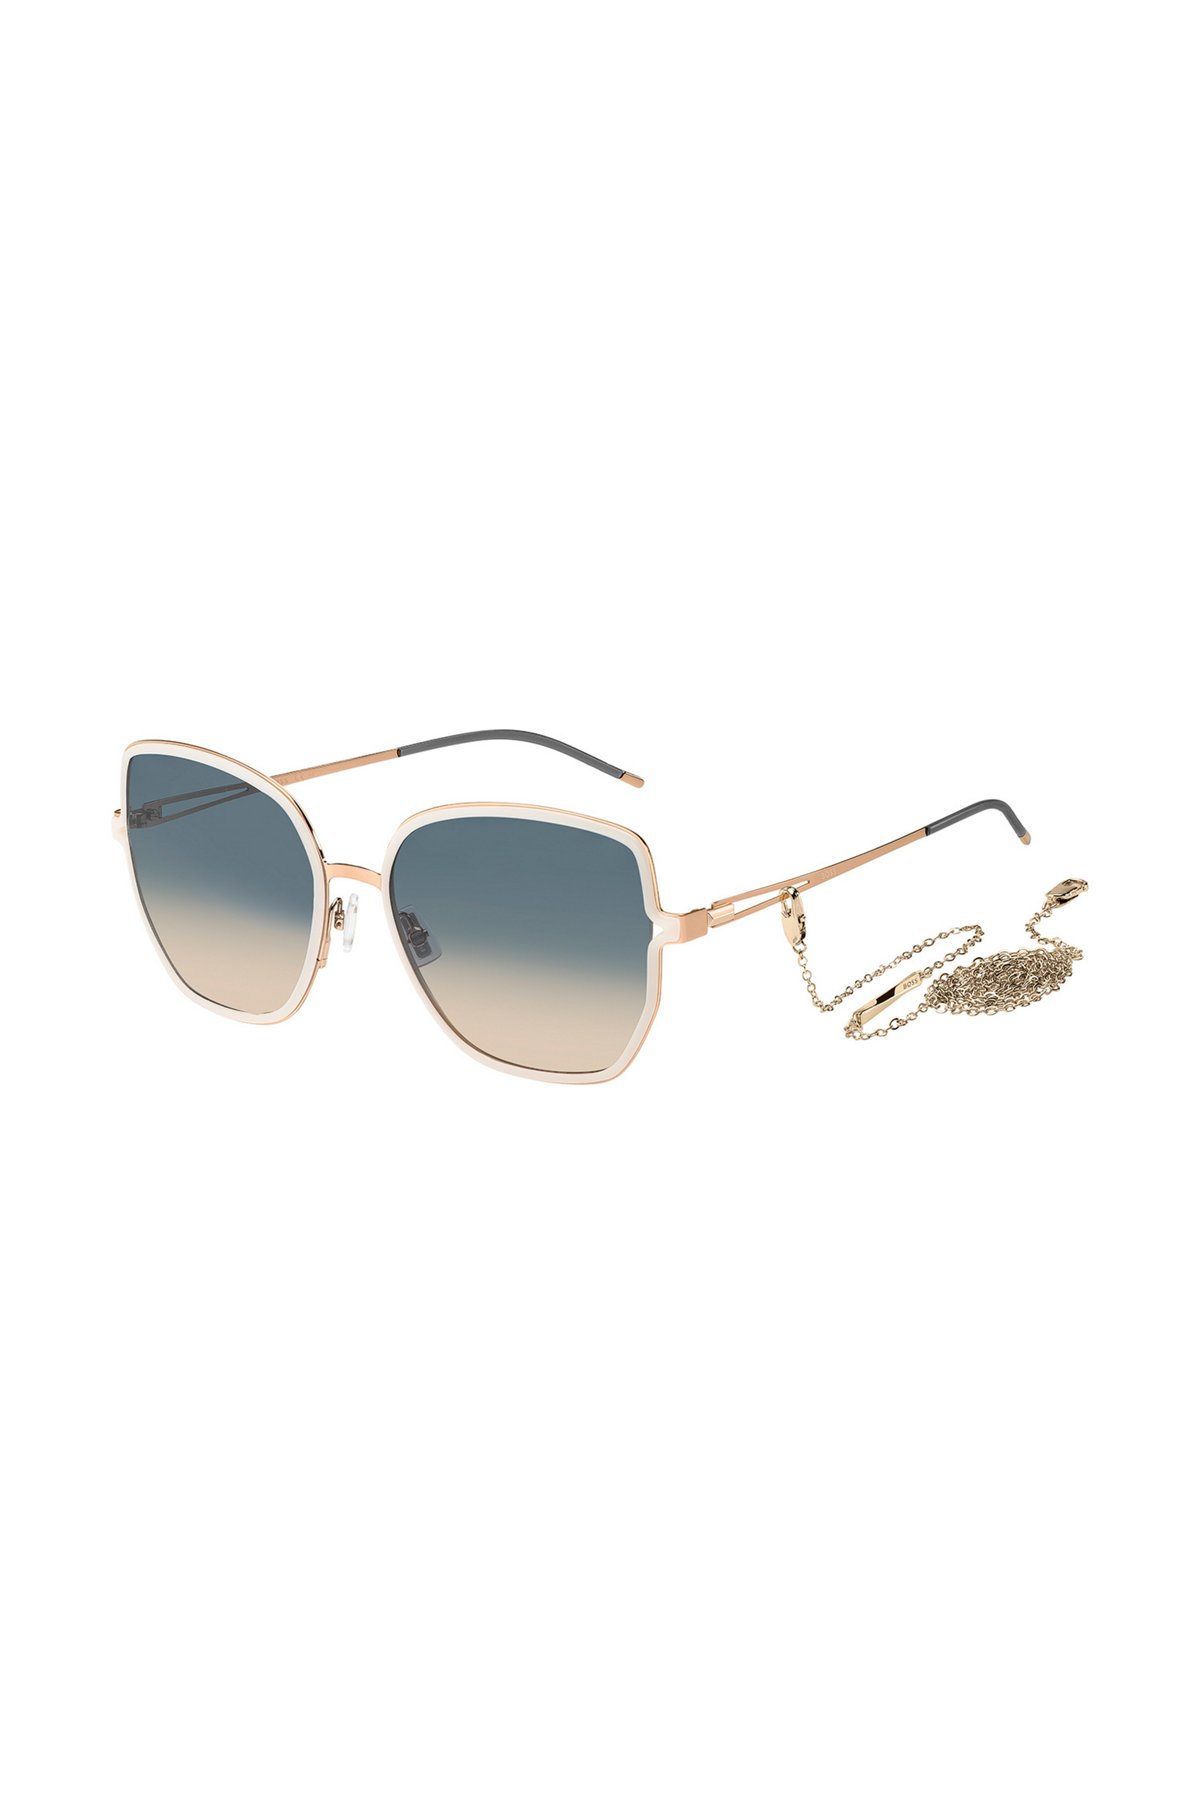 Gold-tone sunglasses with forked temples and branded chain, Assorted-Pre-Pack